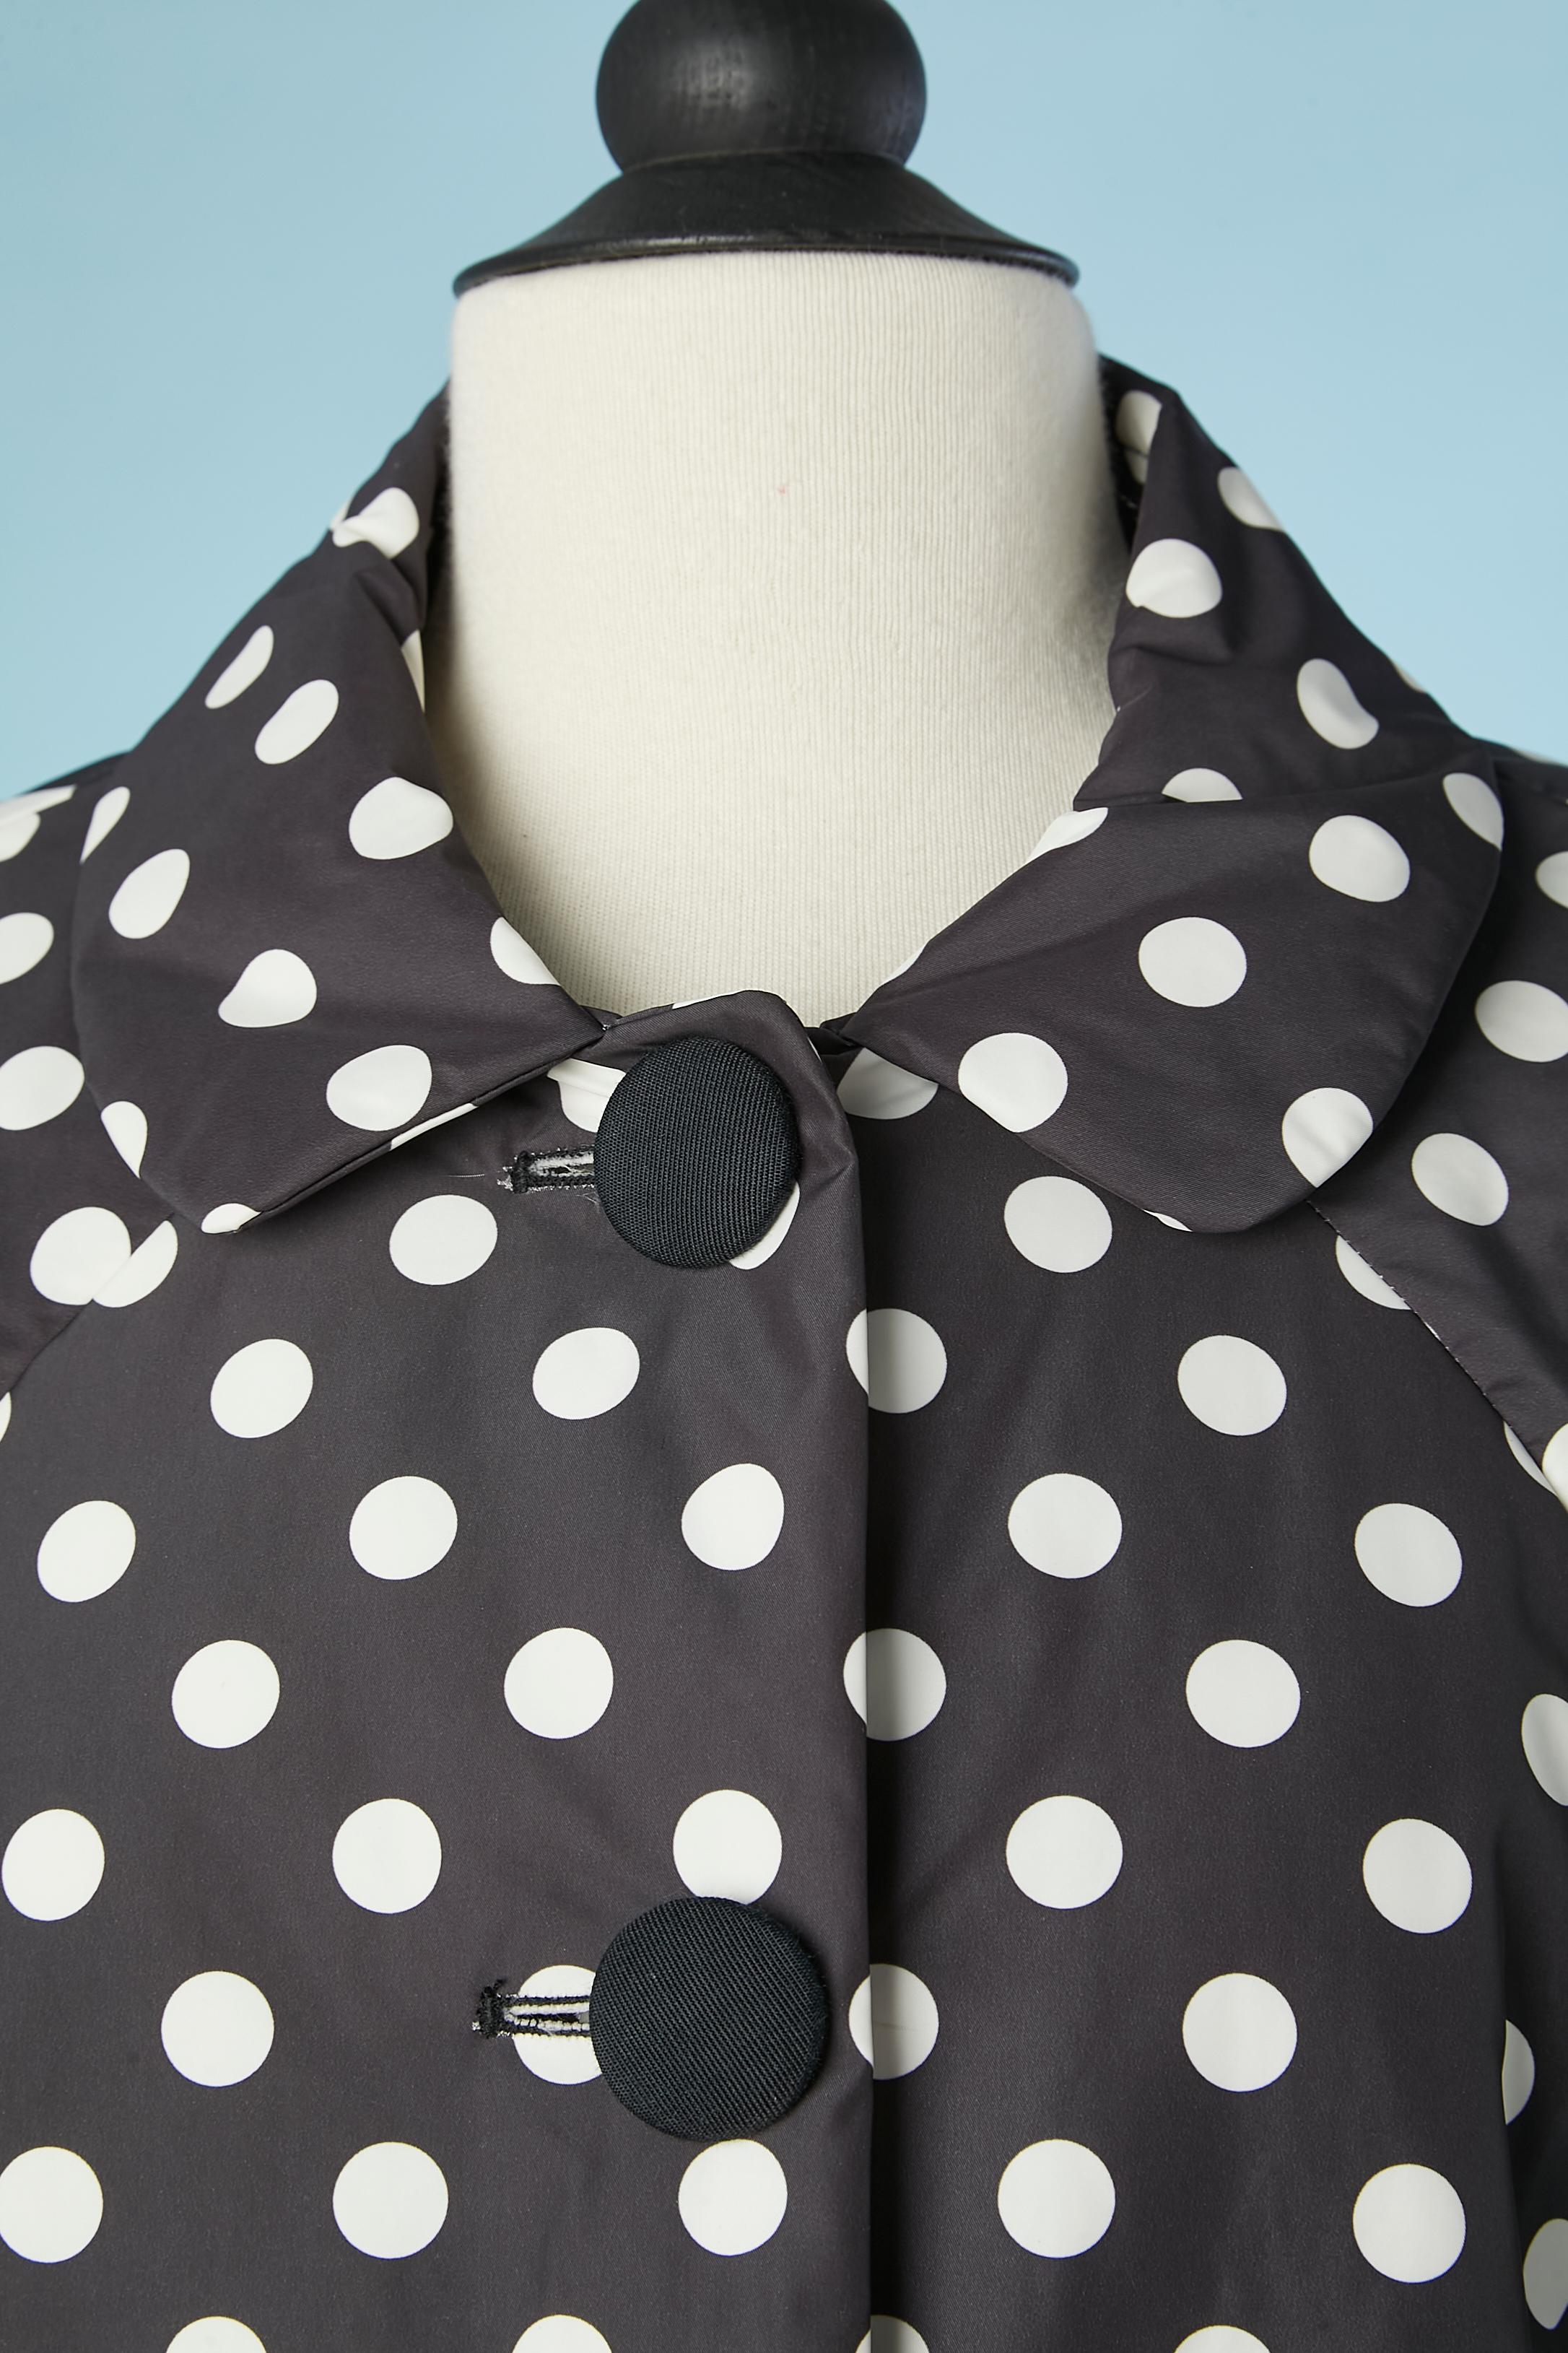 Short sleeves down jacket with polka dots print. Elastic waistband inside. Pockets close with snap and gros-grain piping on the edge. Buttons covered with fabric.
Raglan sleeves.
SIZE M